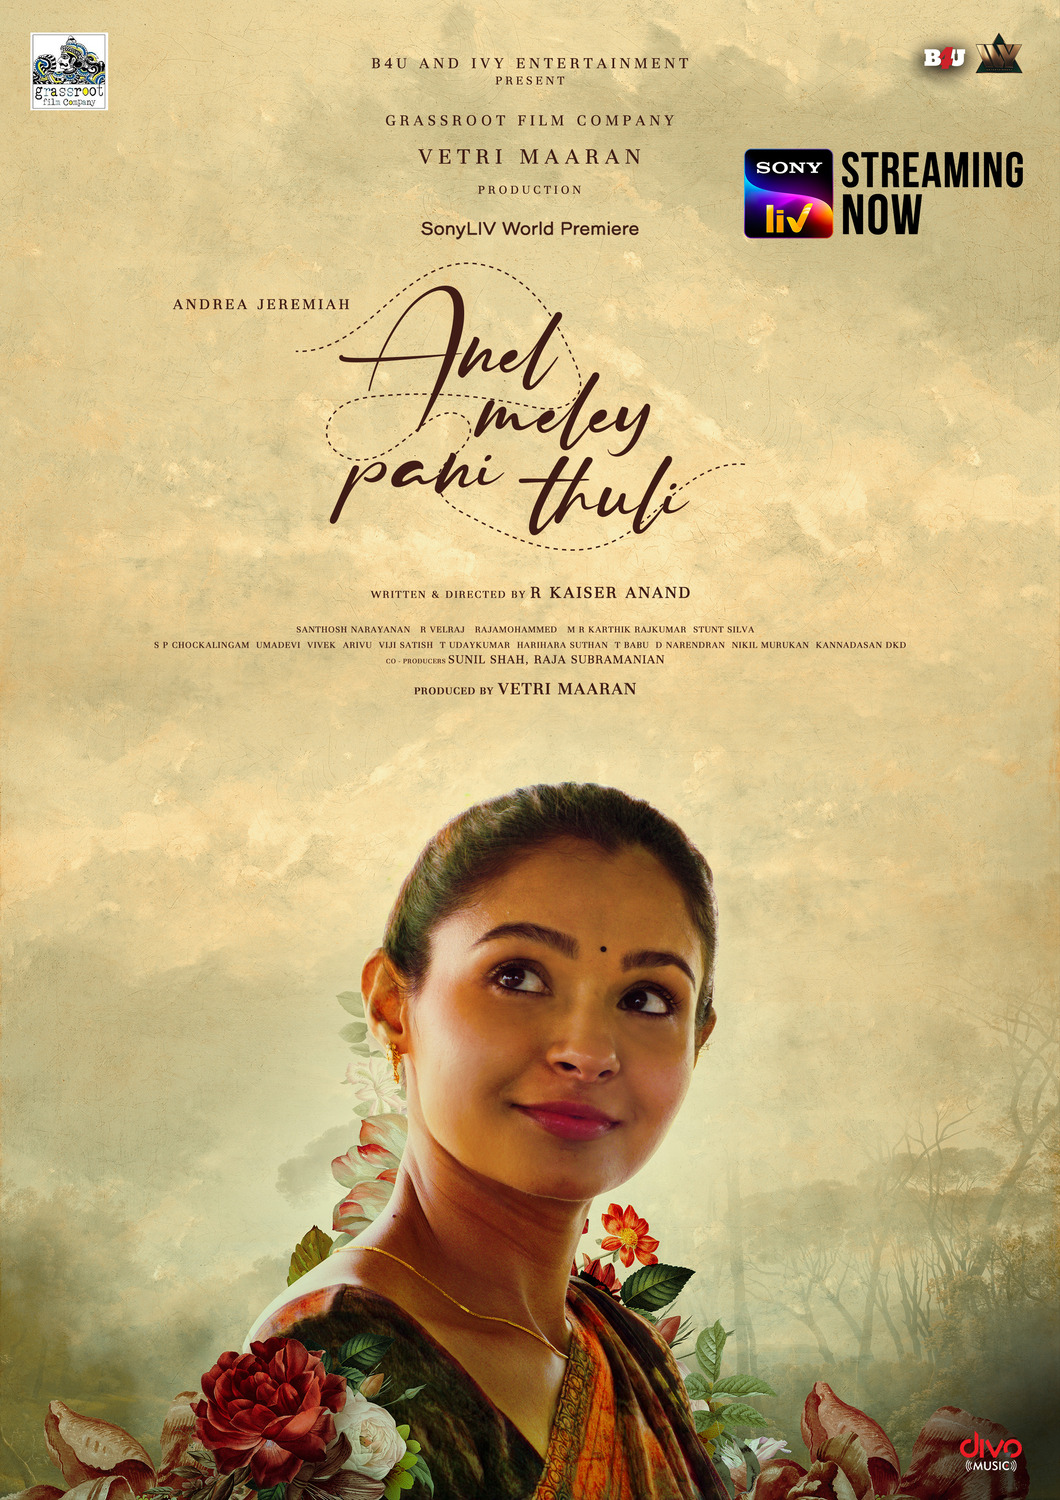 Extra Large Movie Poster Image for Anel Meley Panithuli (#3 of 7)